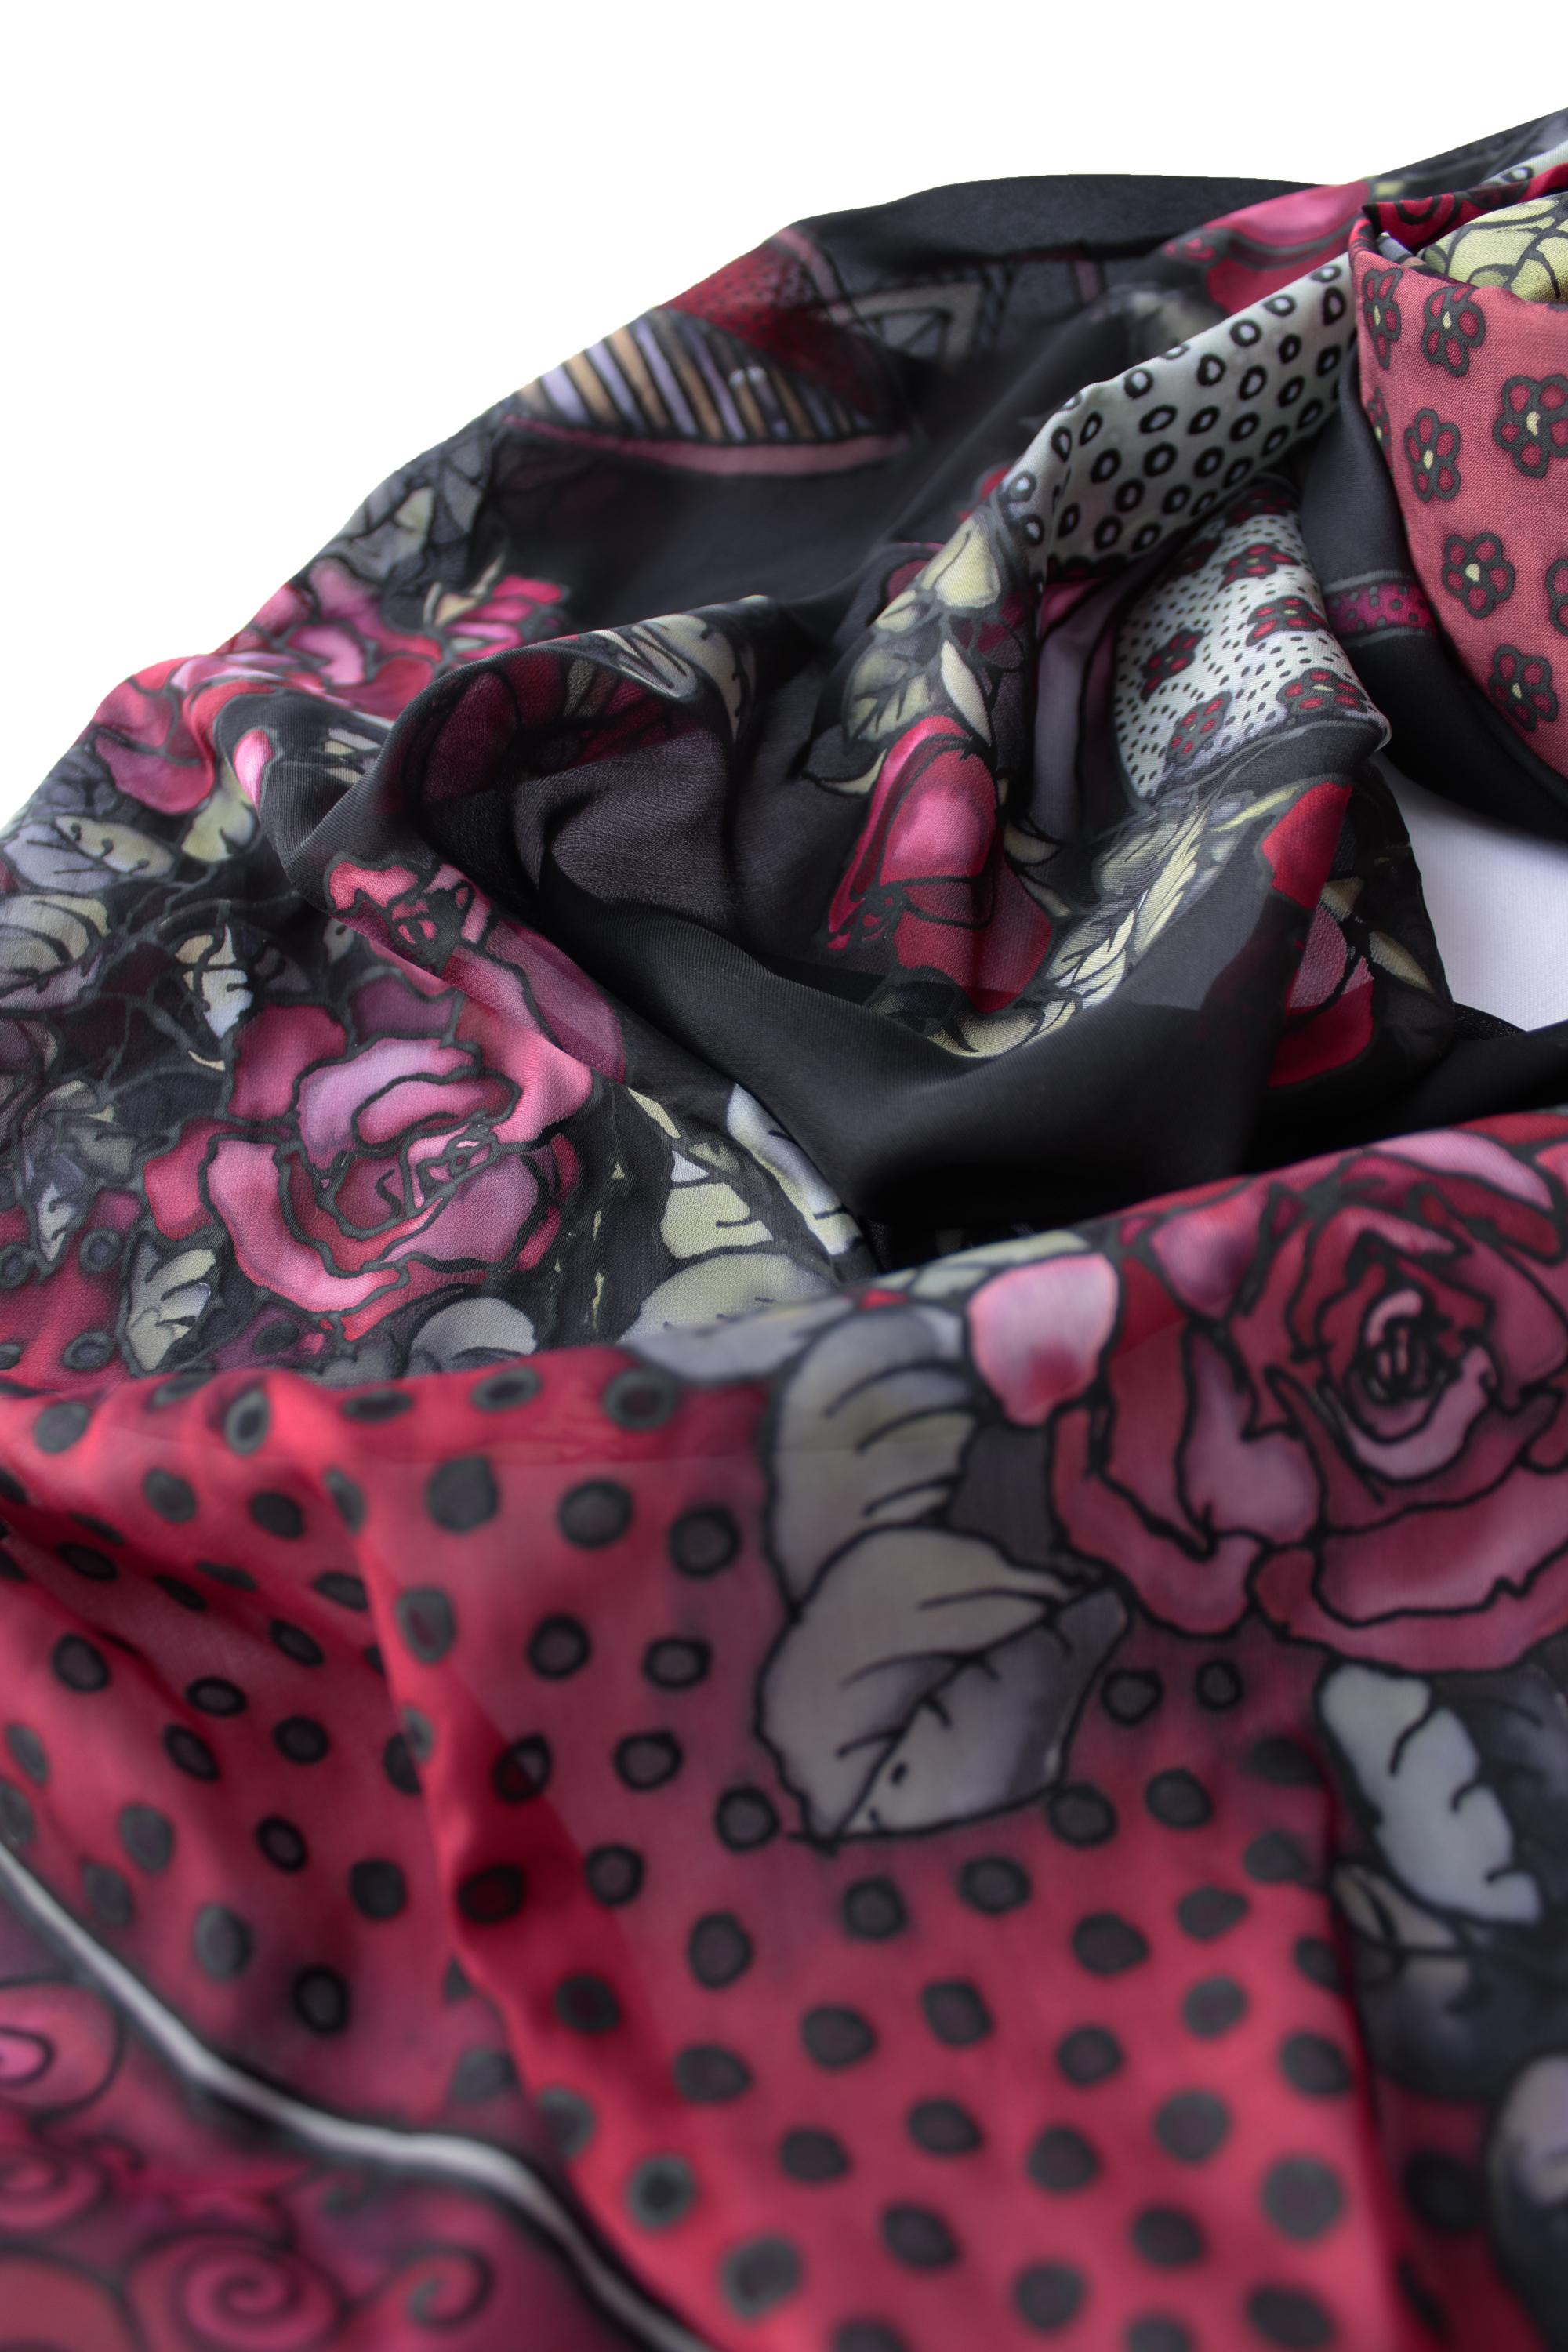 Hand-PAINTED Black and Red Women Silk Scarf with Roses. Silk chiffon scarf